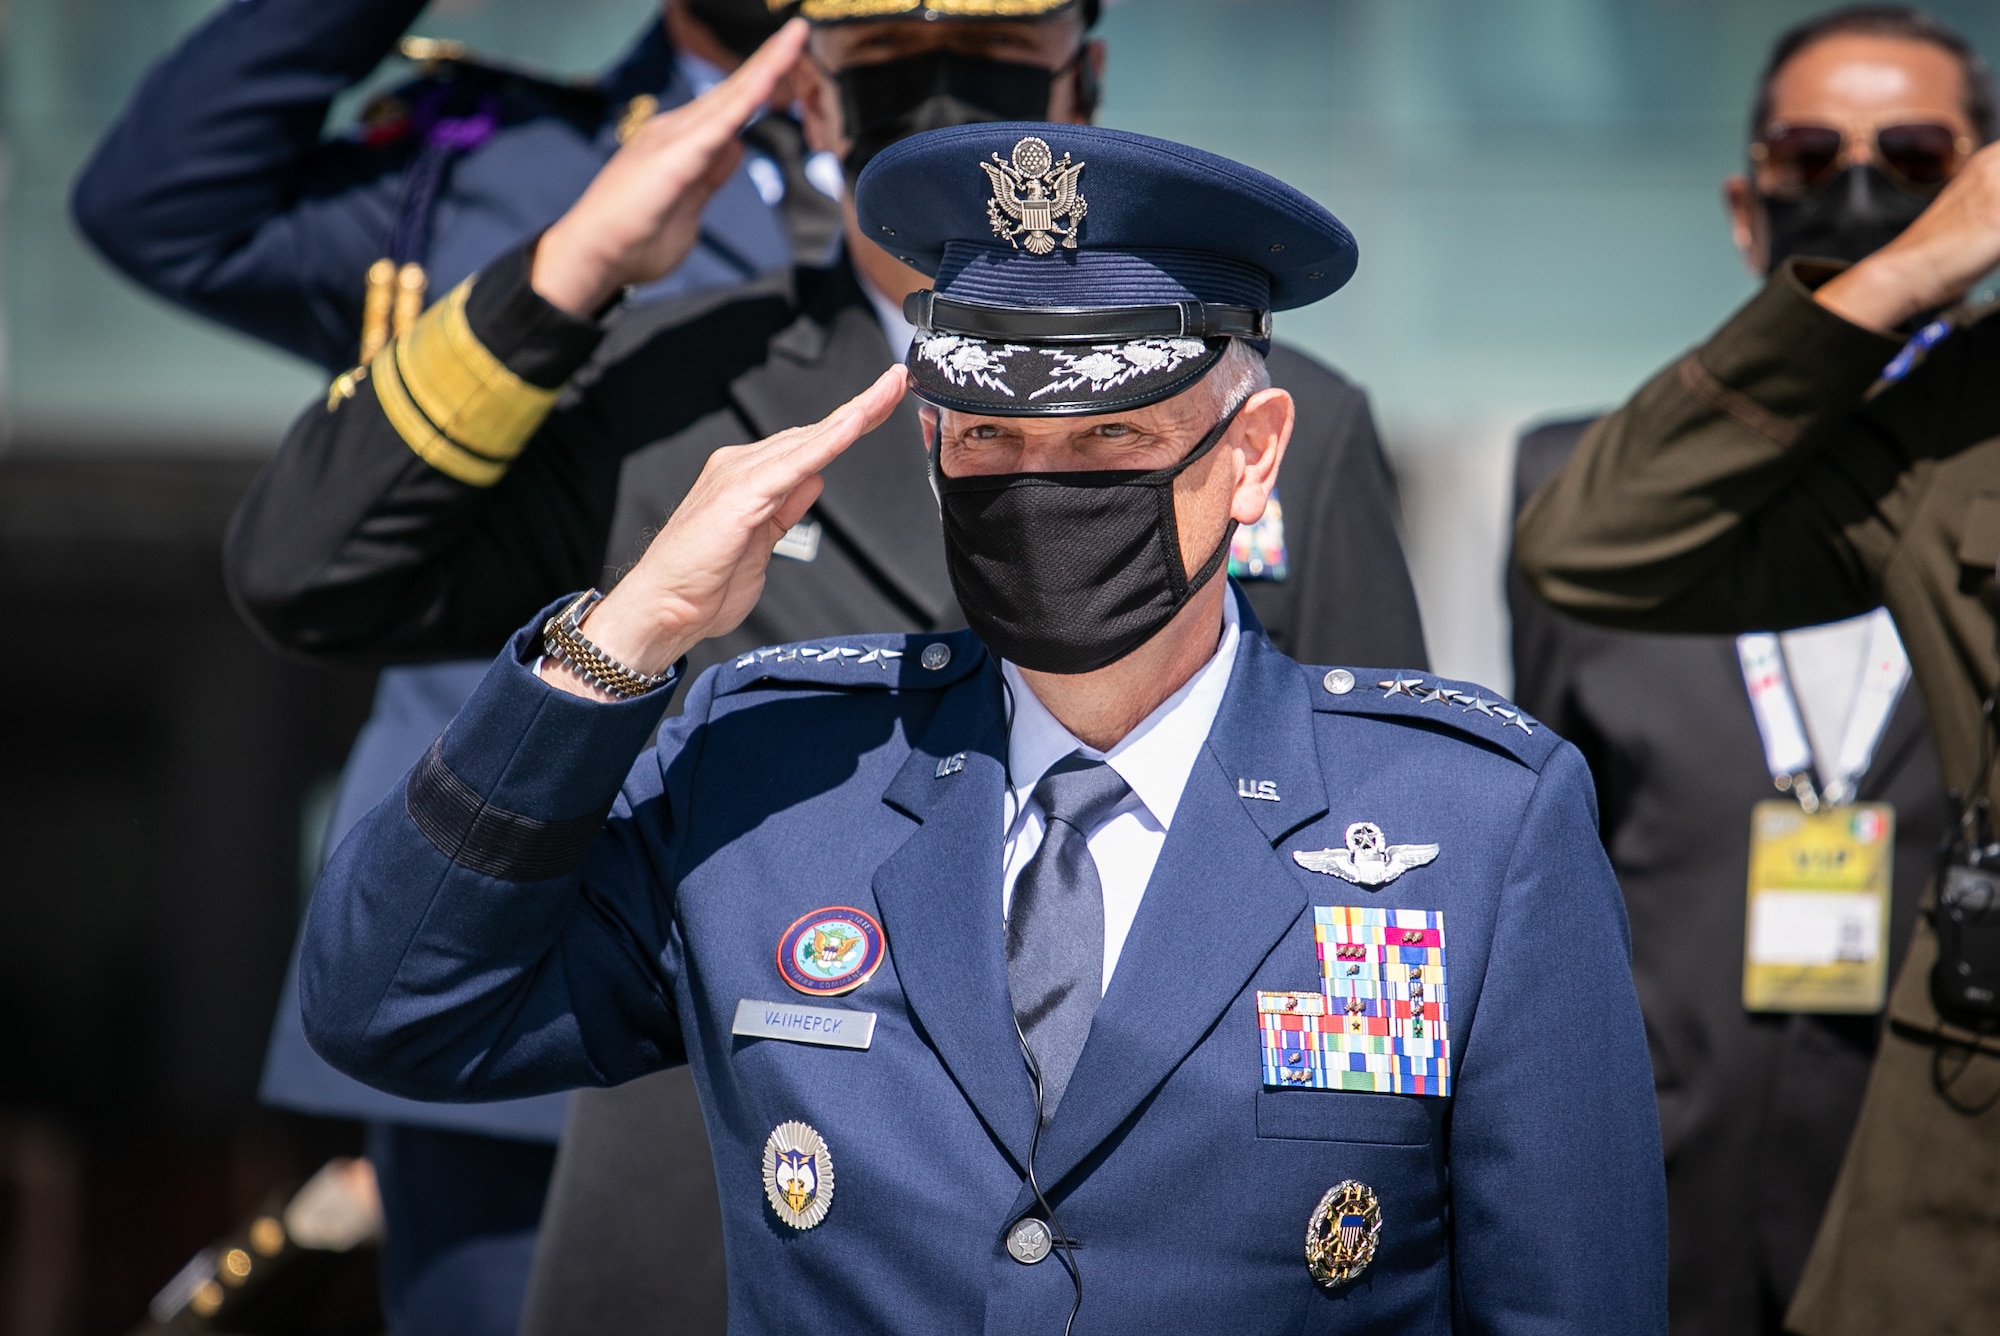 U.S. Air Force Gen. Glen D. Vanherck, commander of North American Aerospace Defense Command and U.S. Northern Command, attends an inauguration ceremony during the Feria Aeroespacial México (FAMEX), or the Mexico Aerospace Fair, at Base Aérea No.1 de Santa Lucía, Mexico, Sep. 22, 2021. U.S. participation in the air show is meant as a sign of support for Mexico, a close partner and neighbor.